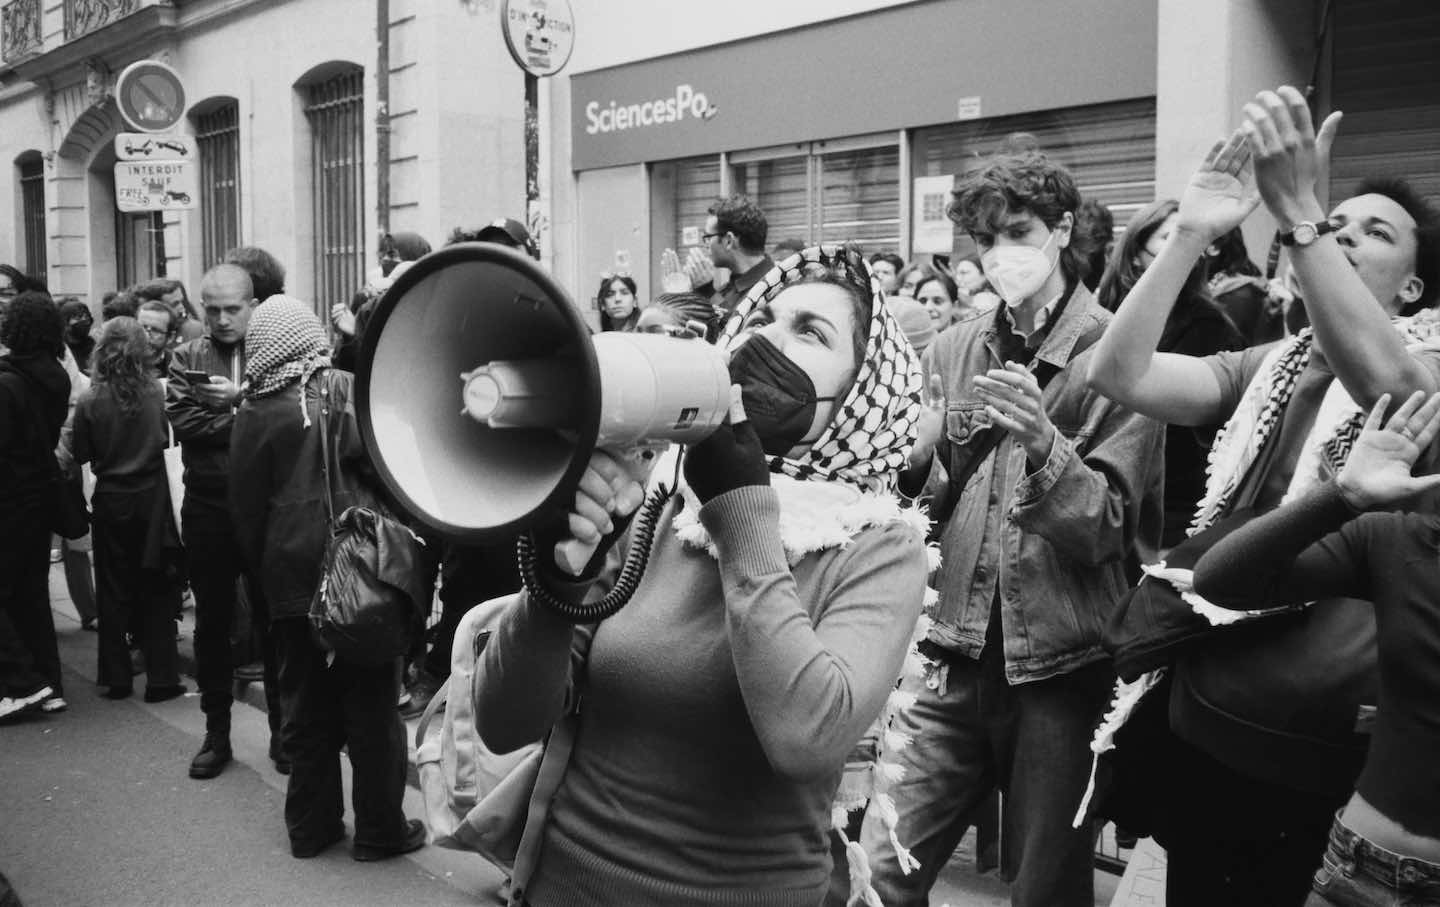 A student leads a chant on the street in front of Sciences Po on April 26.